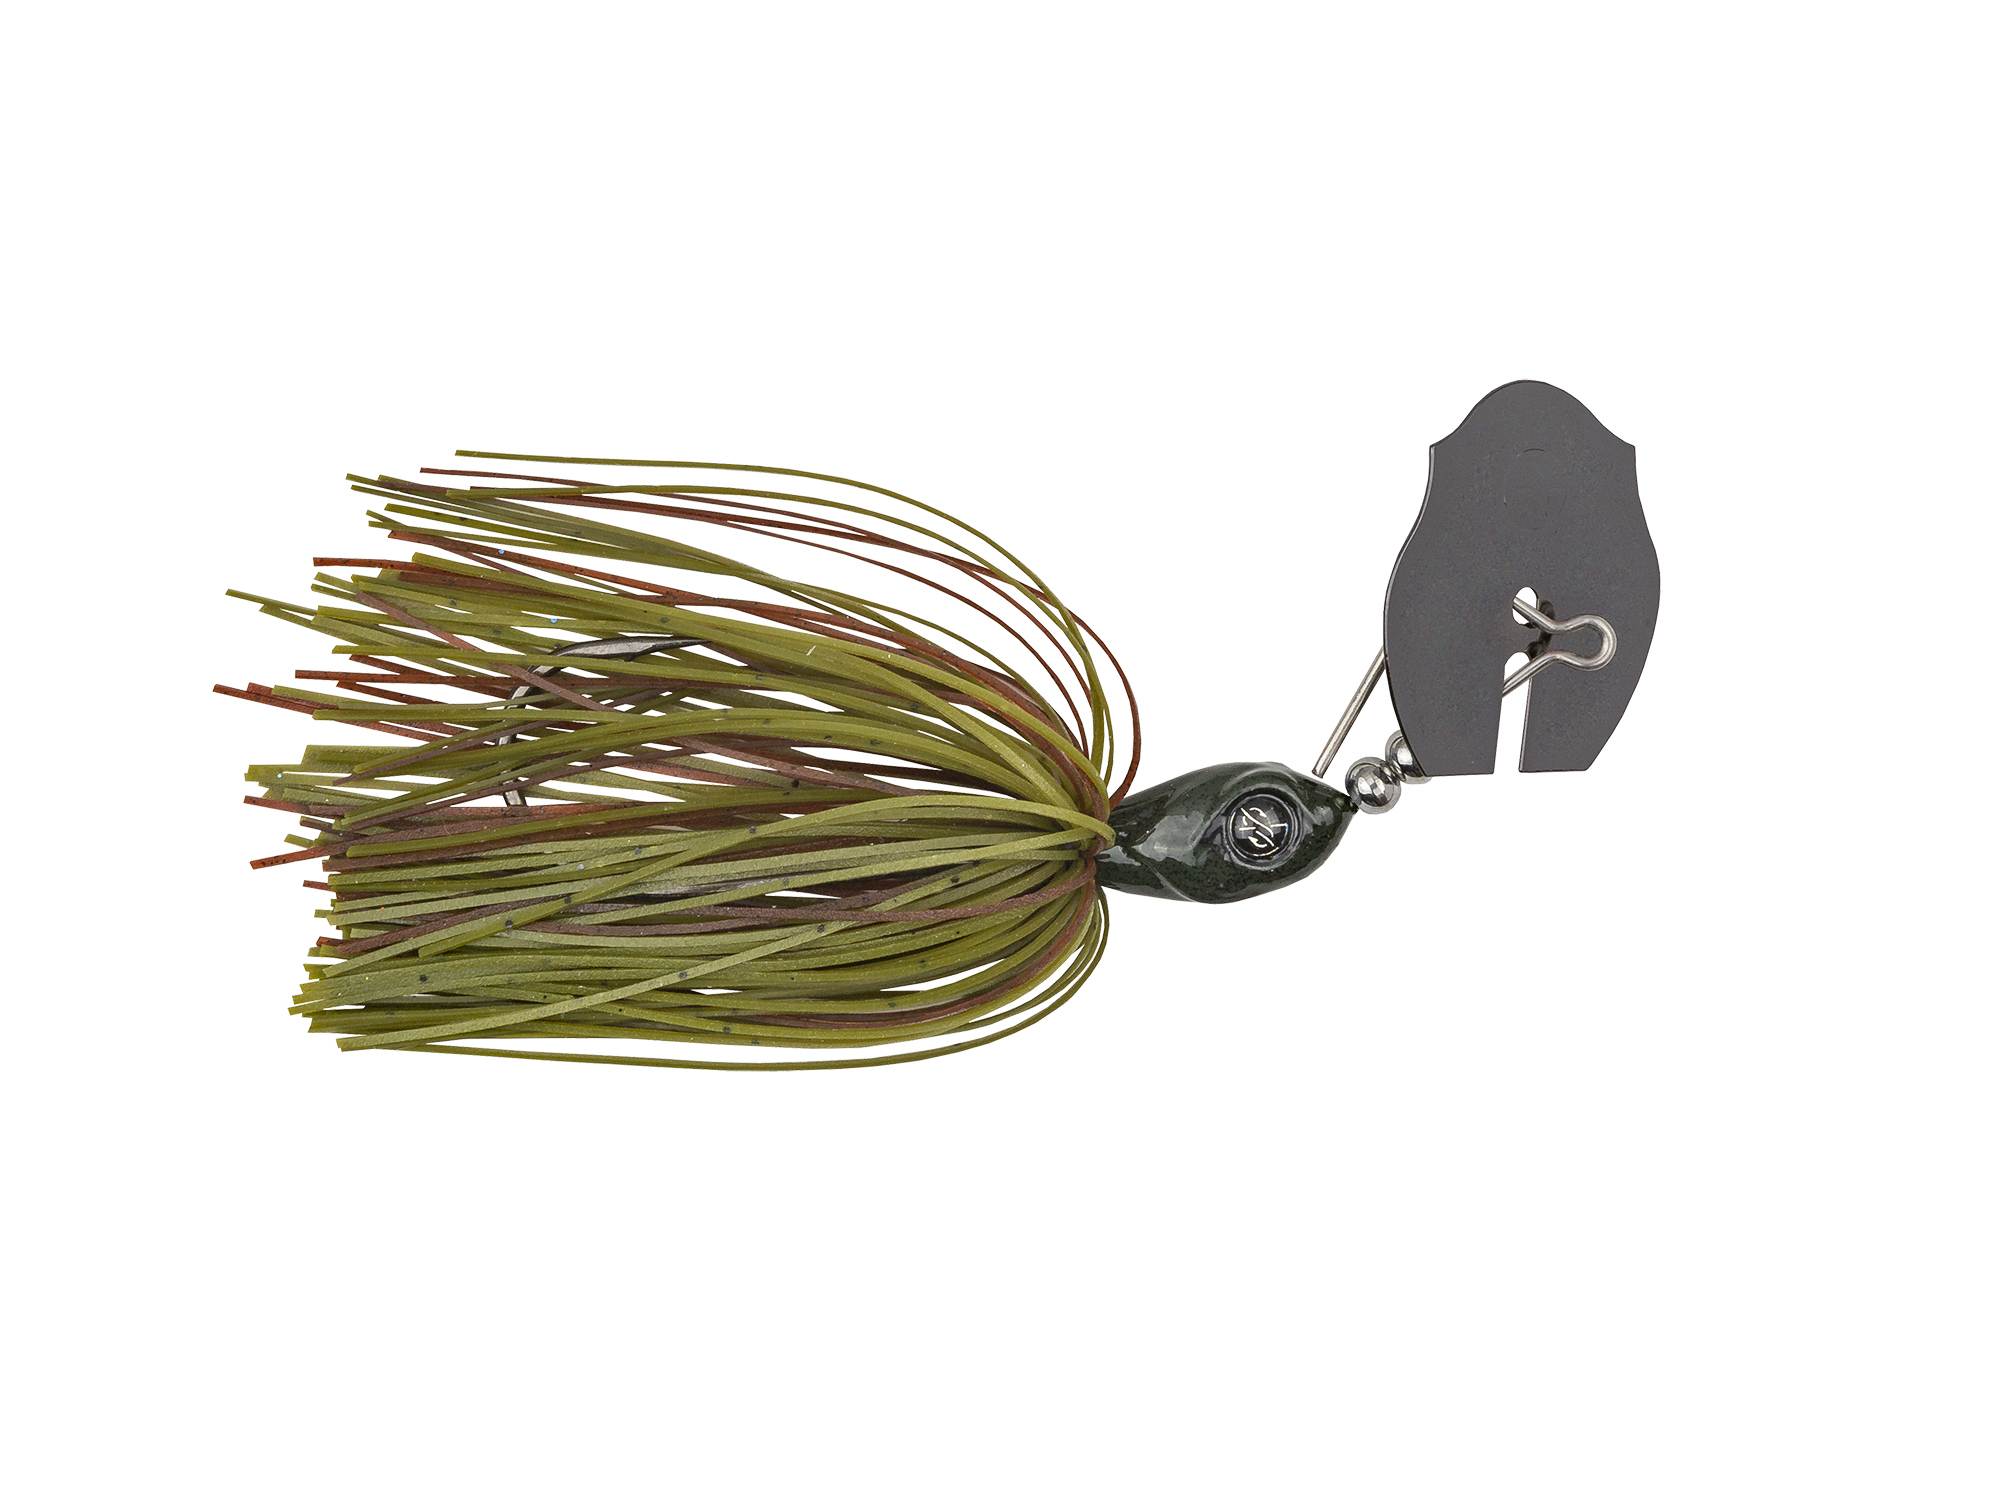 Karl's Amazing Baits Hoss Craw - 3.8 in. – Blue Springs Bait & Tackle